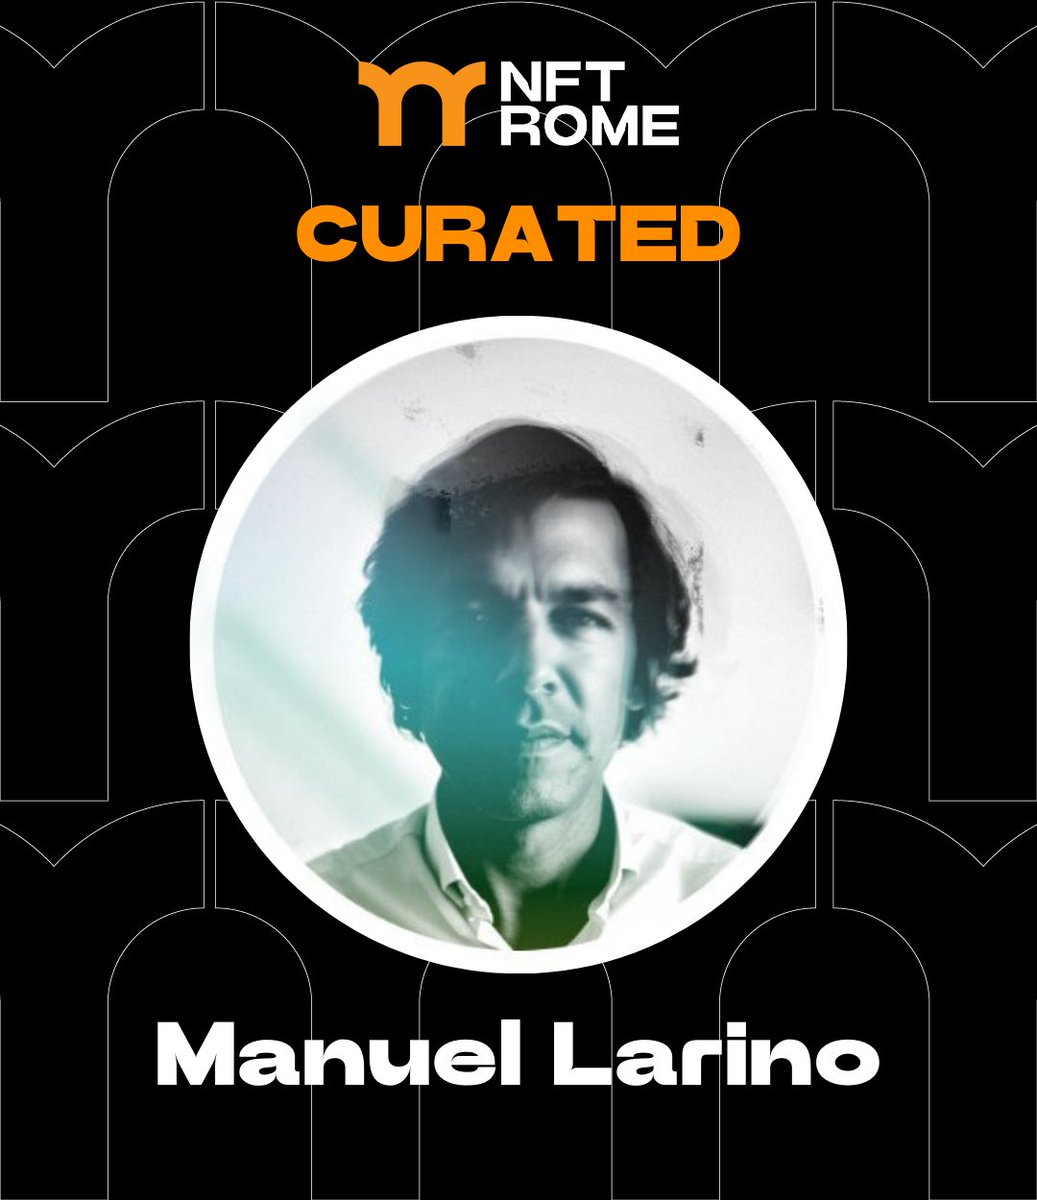 Honoured to announce that @ManuelLarino is part of our curated initiative at NFT Rome 😍 Manuel Larino, a Spanish artist trained at Ringling College, evolved from commercial art to creating symbolic, interactive gallery pieces.